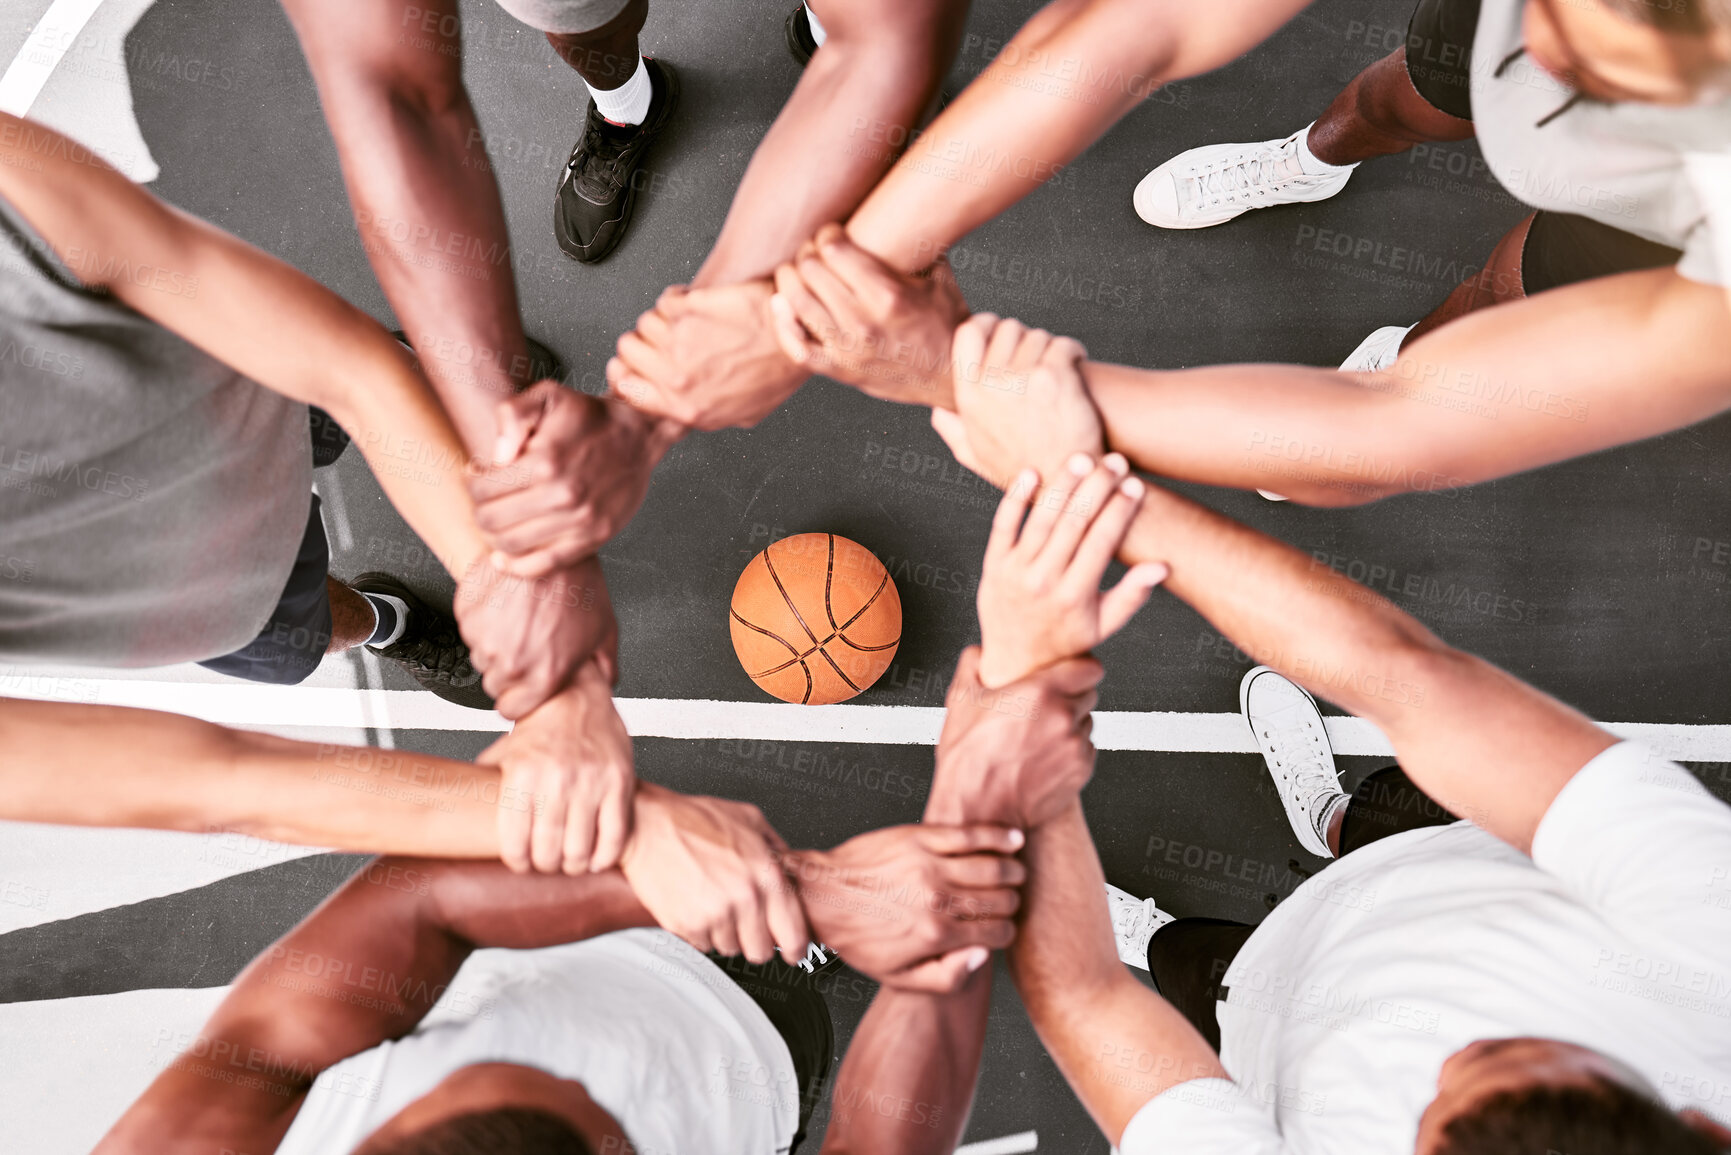 Buy stock photo Athletes showing trust and standing united. Men expressing team spirit with their hands joined huddling at a basketball game. Sportsmen holding wrists in huddle for support and unity at sports match.